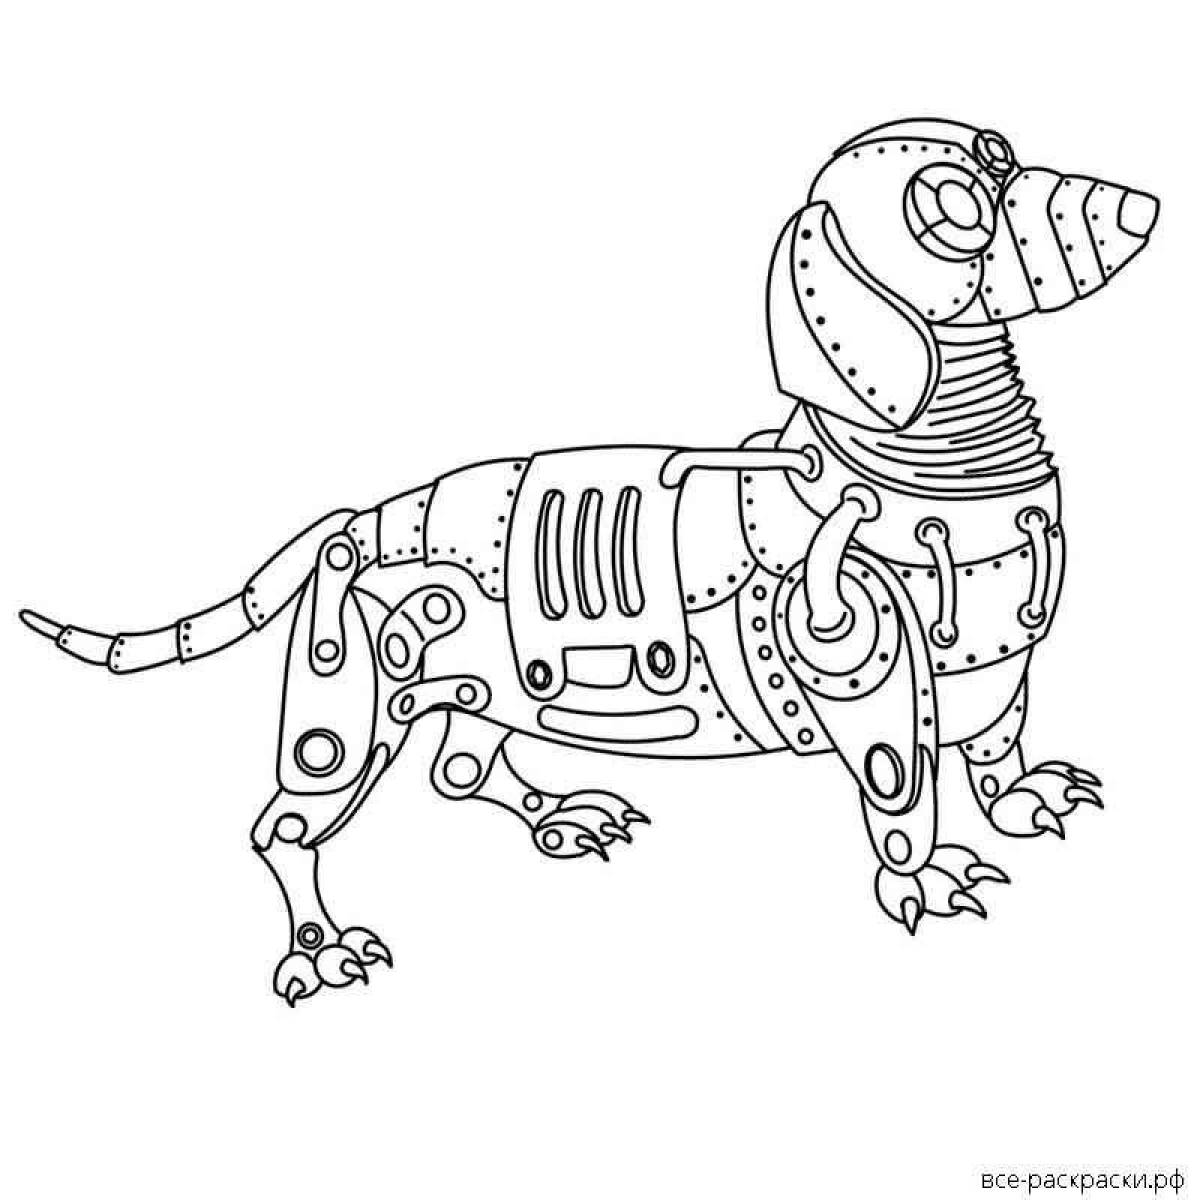 Colorful robot dog coloring page